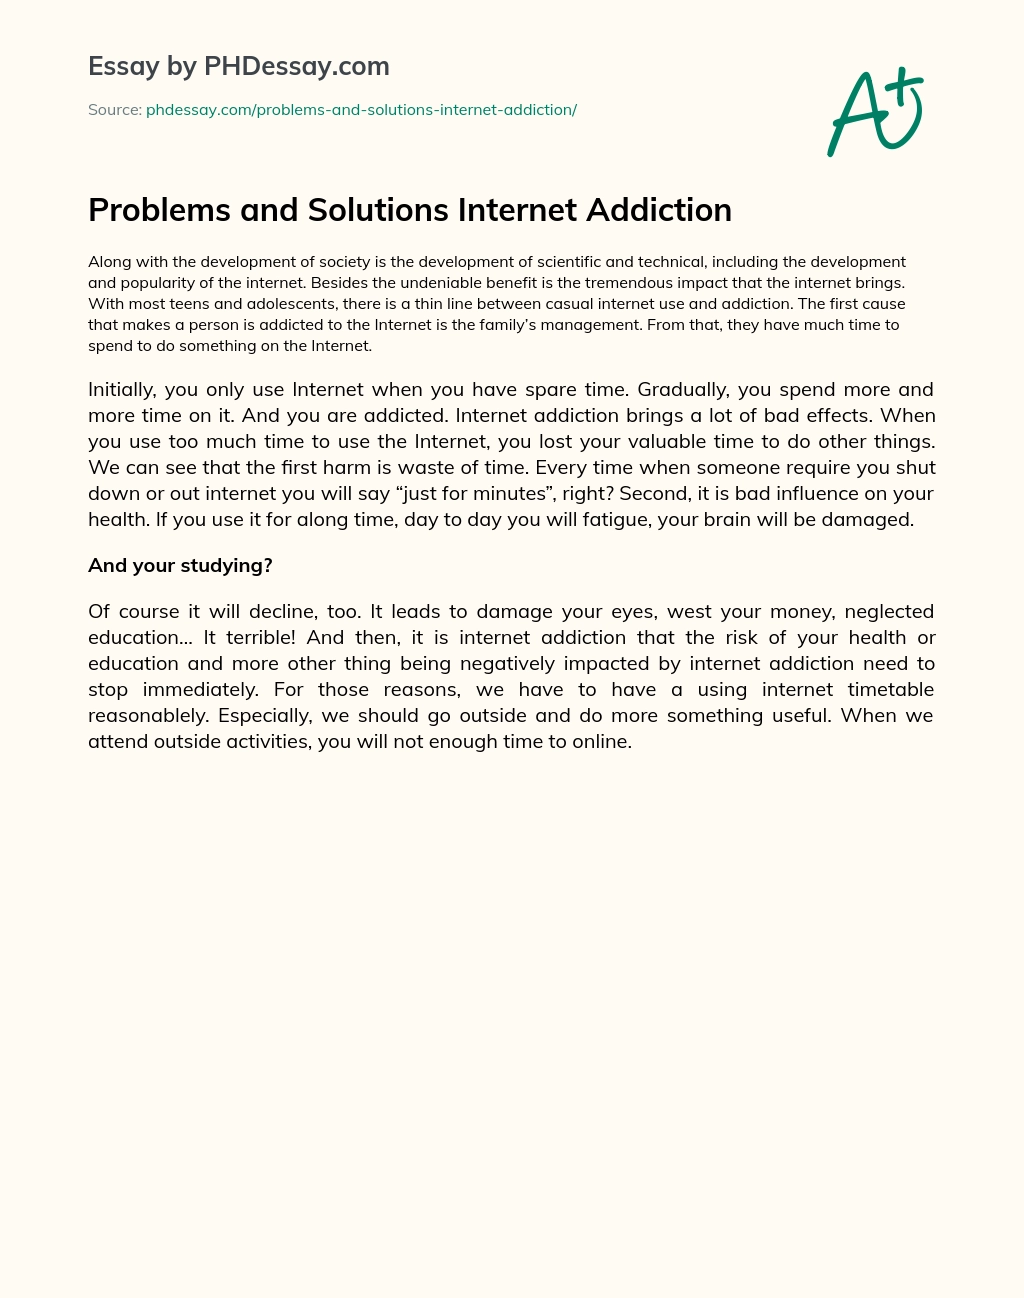 Problems and Solutions Internet Addiction essay